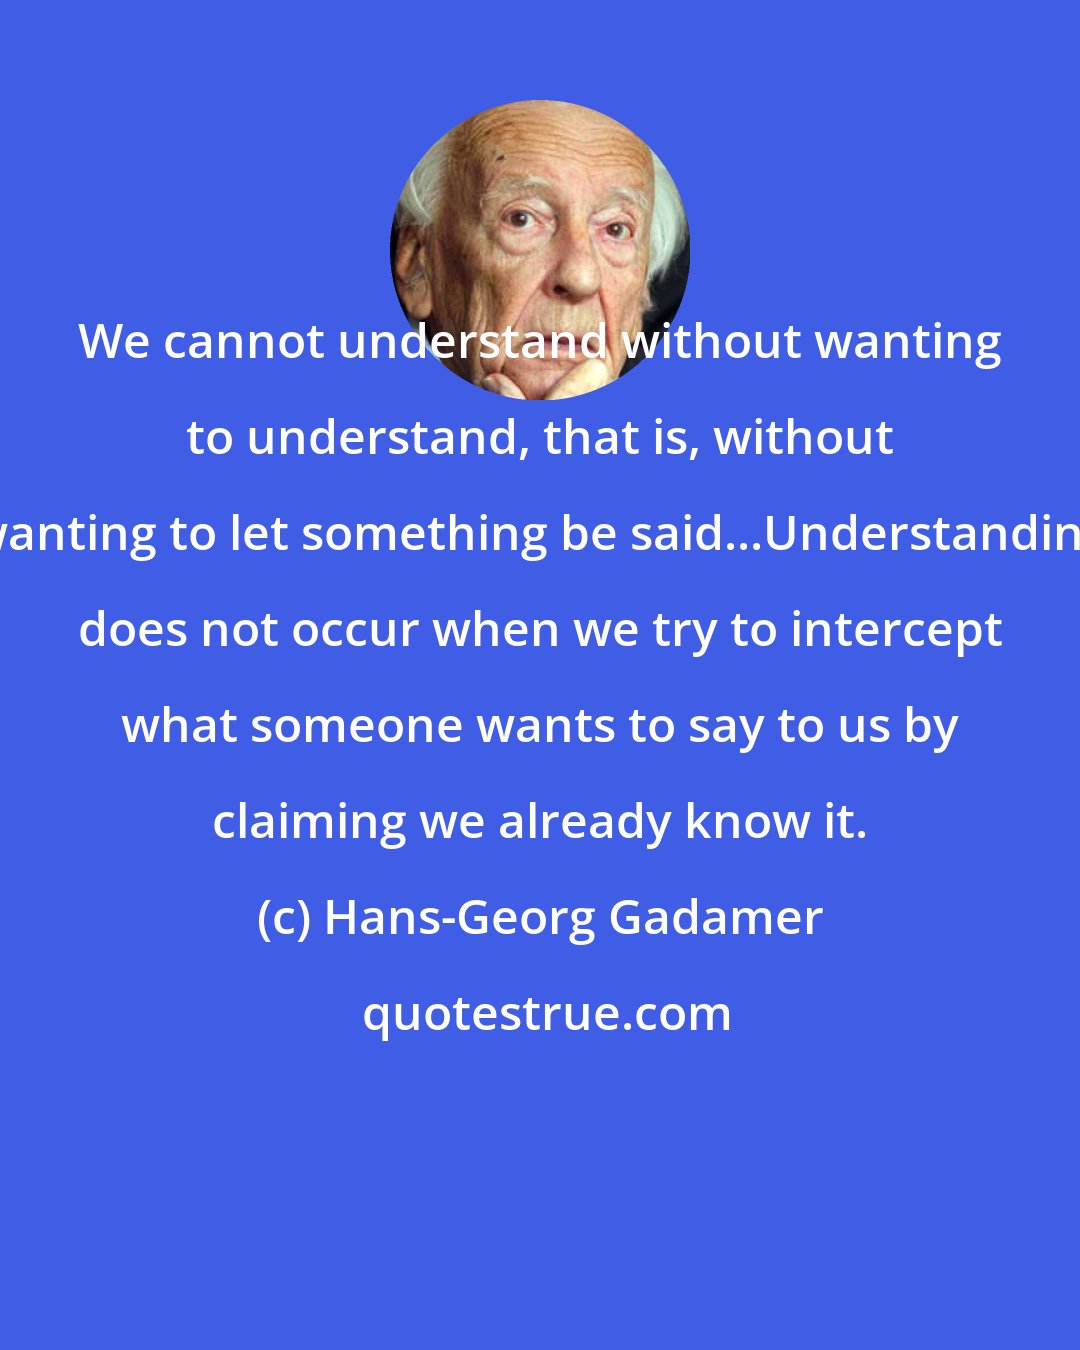 Hans-Georg Gadamer: We cannot understand without wanting to understand, that is, without wanting to let something be said...Understanding does not occur when we try to intercept what someone wants to say to us by claiming we already know it.